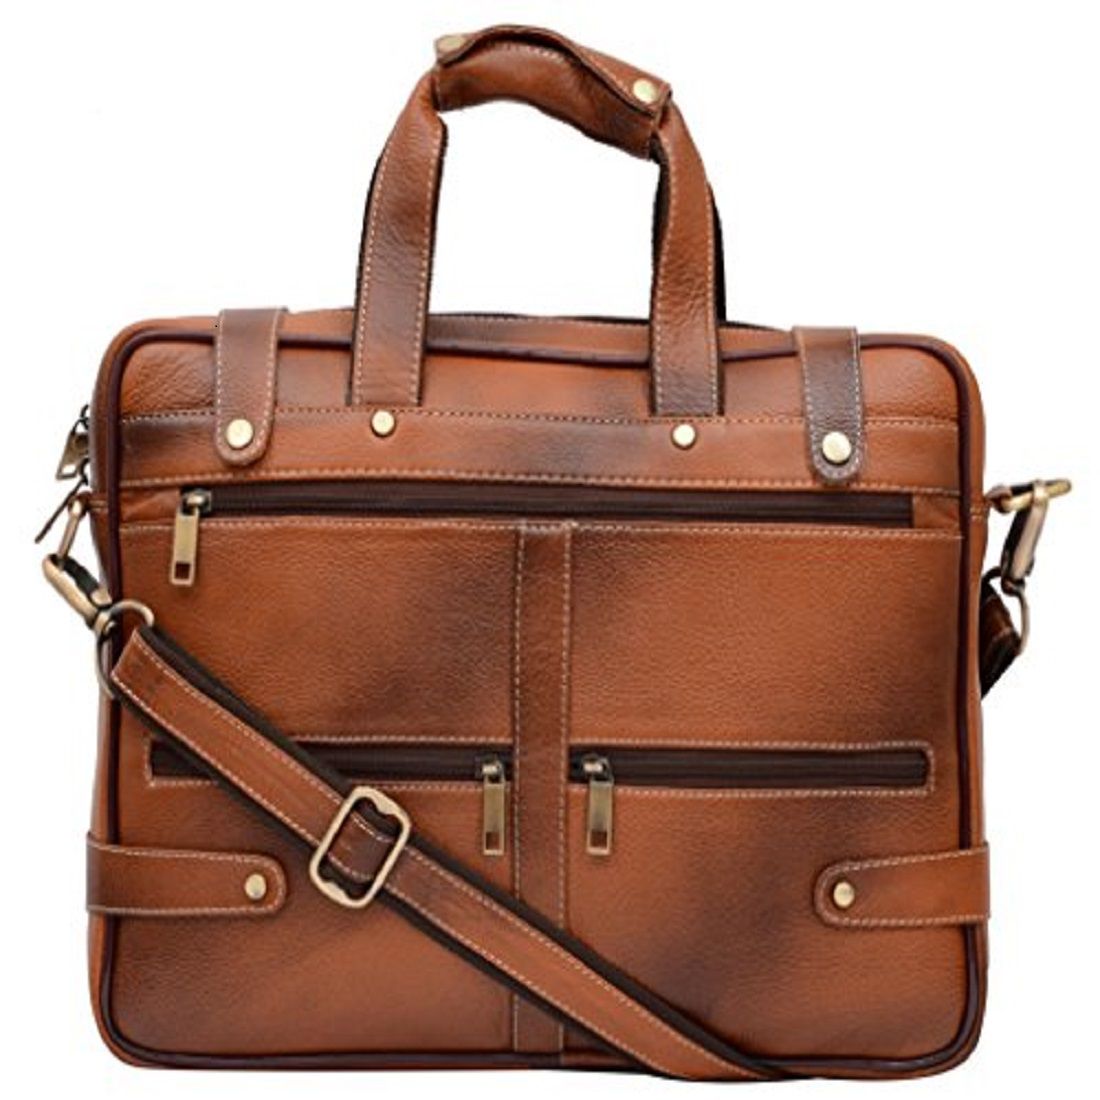 Ostrich SK-2029 Brown Leather Office Bag - Buy Ostrich SK-2029 Brown ...